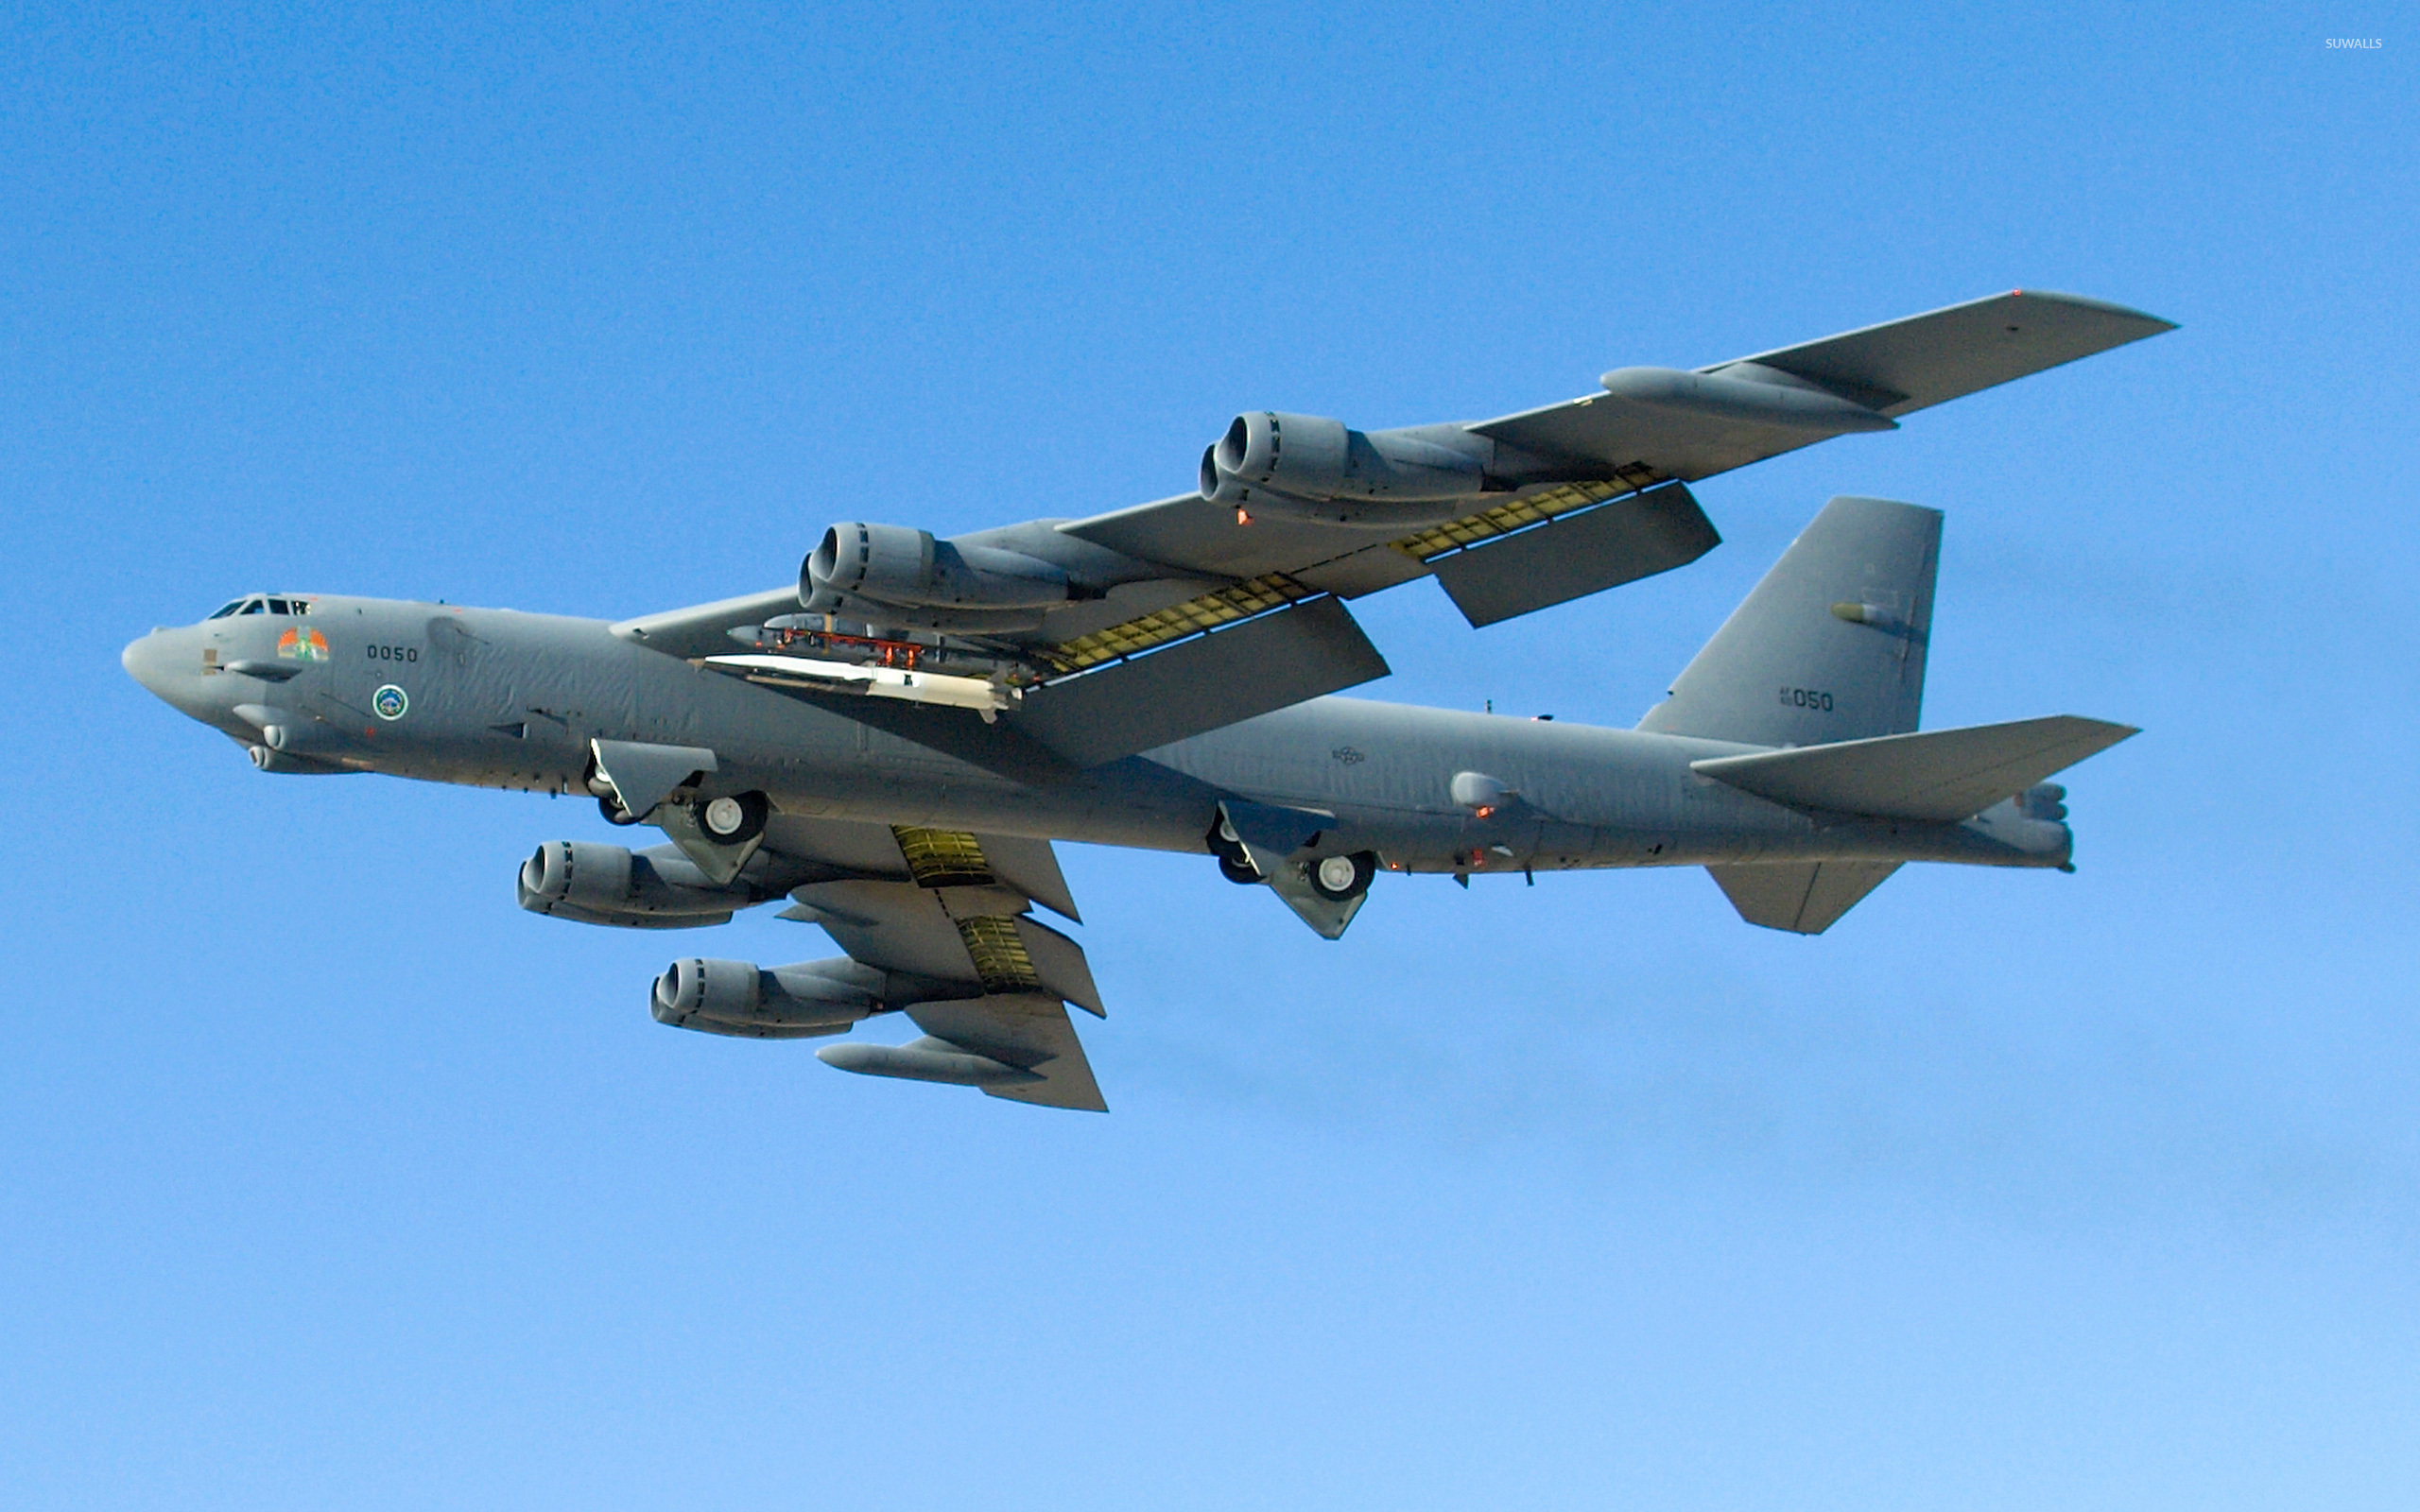 Boeing B-52 Stratofortress wallpaper - Aircraft wallpapers - #6156